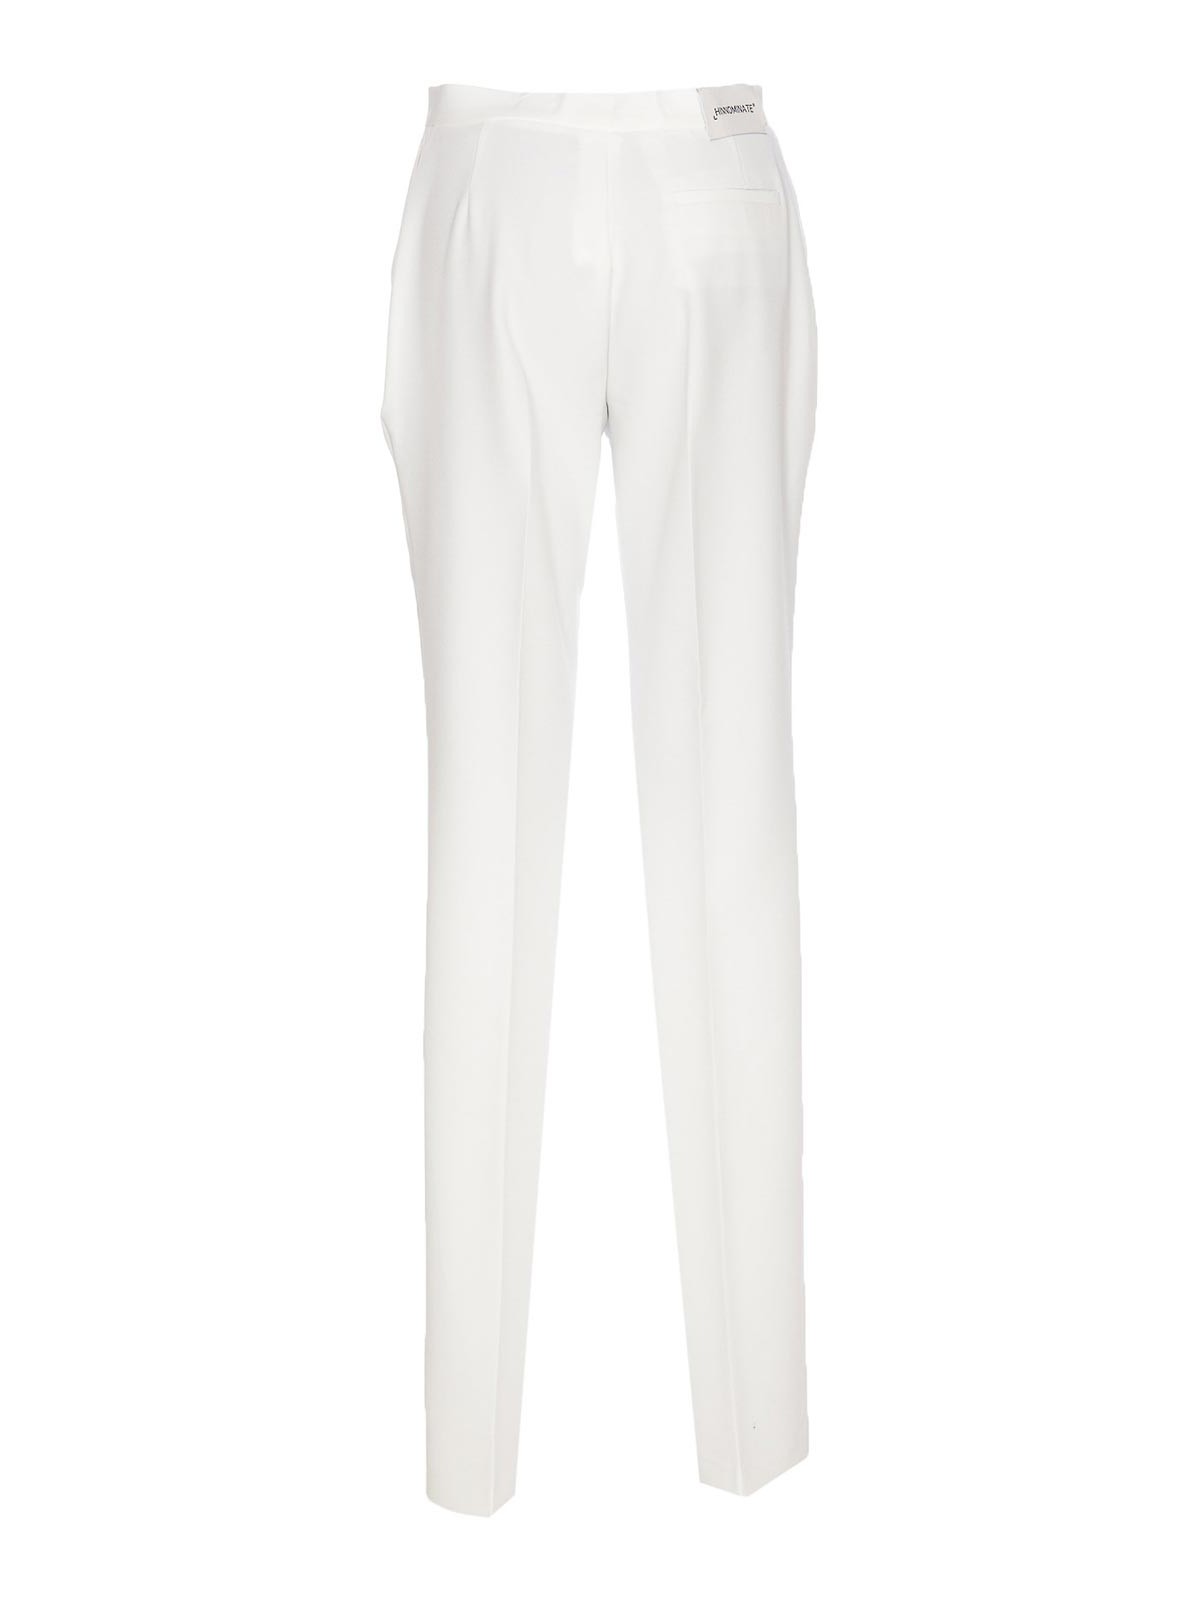 Shop Hinnominate White Trousers Zip Hook Lateral Pockets